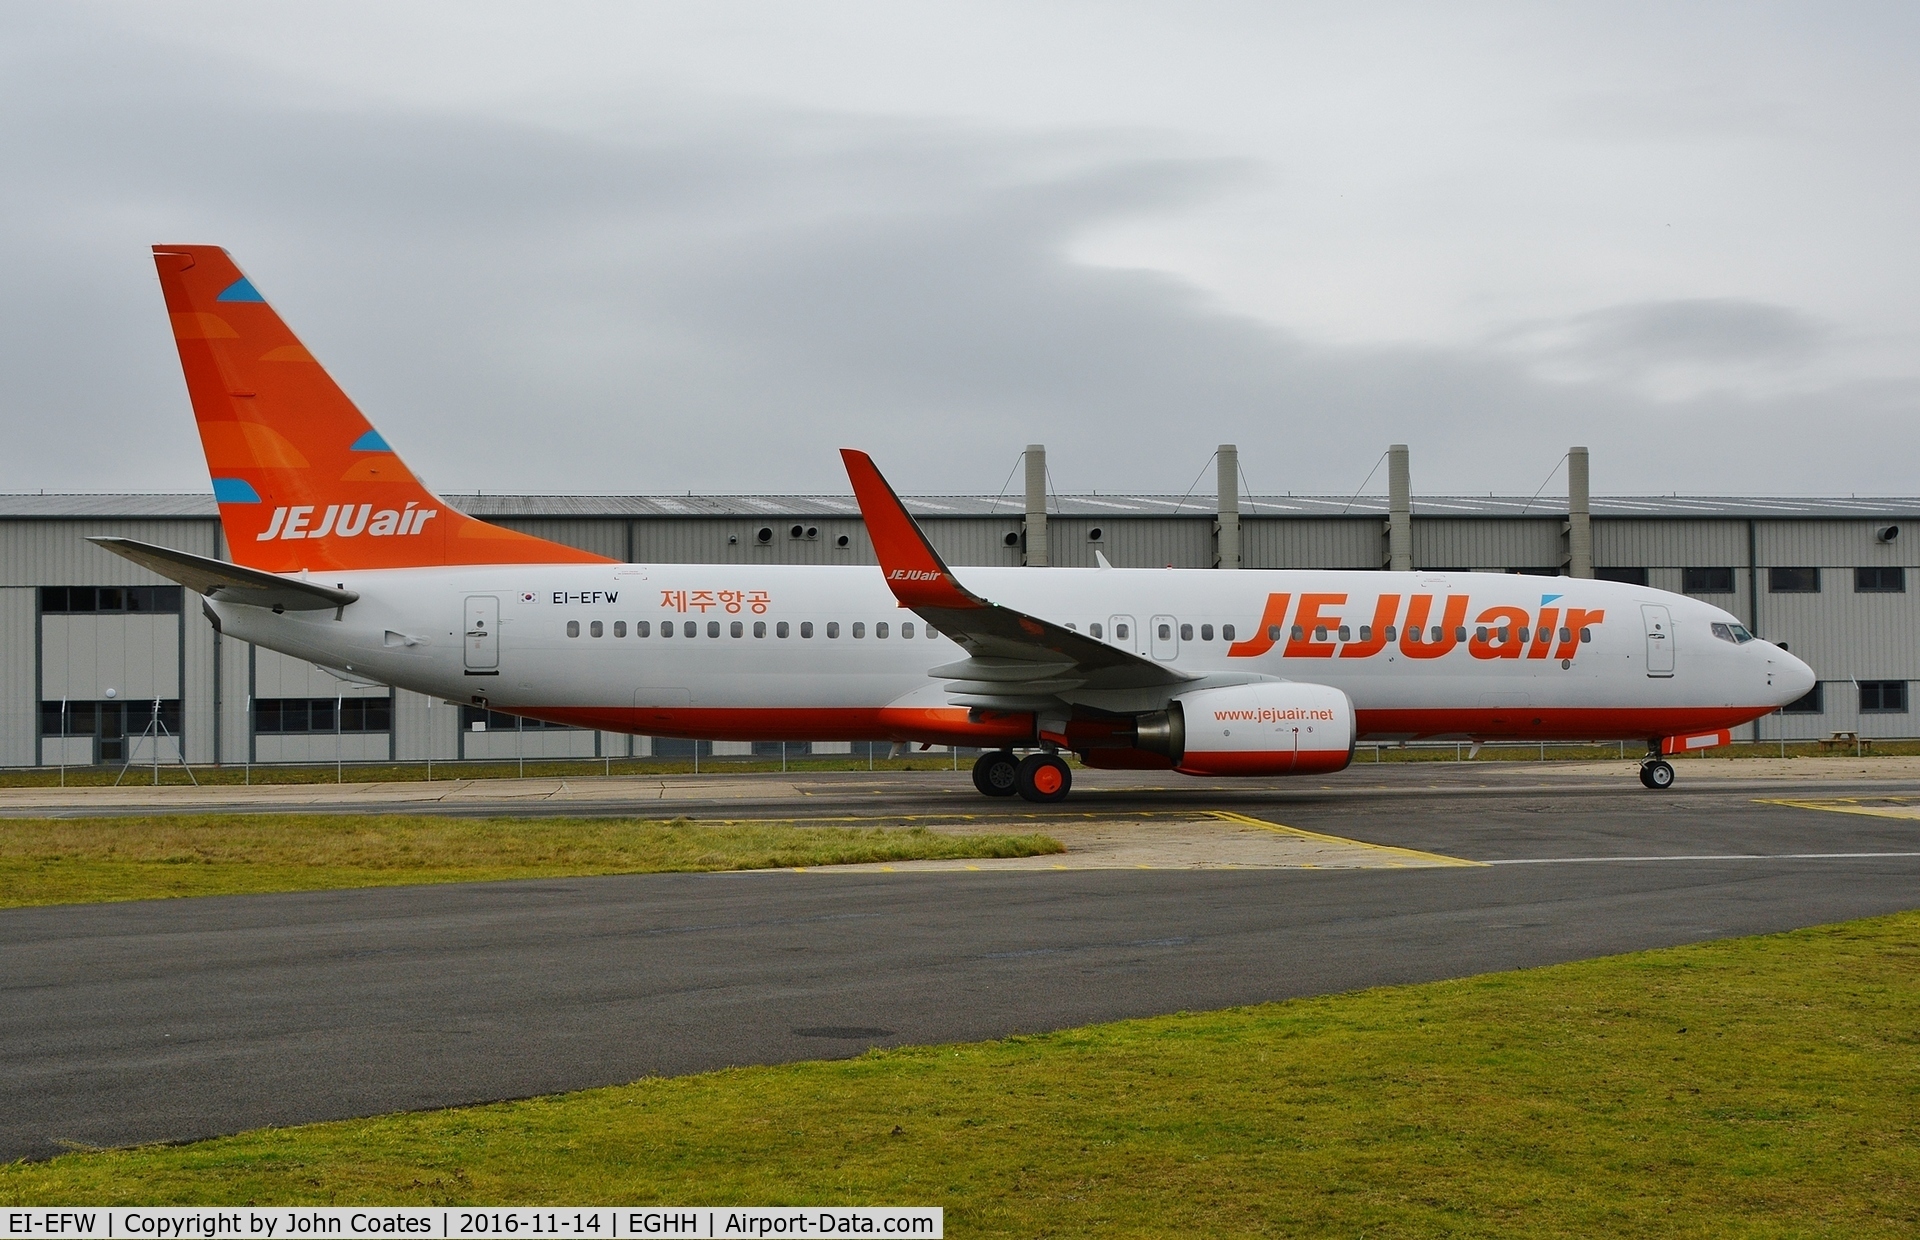 EI-EFW, 2009 Boeing 737-8AS C/N 35018, Departing after repaint to Jeju Air livery